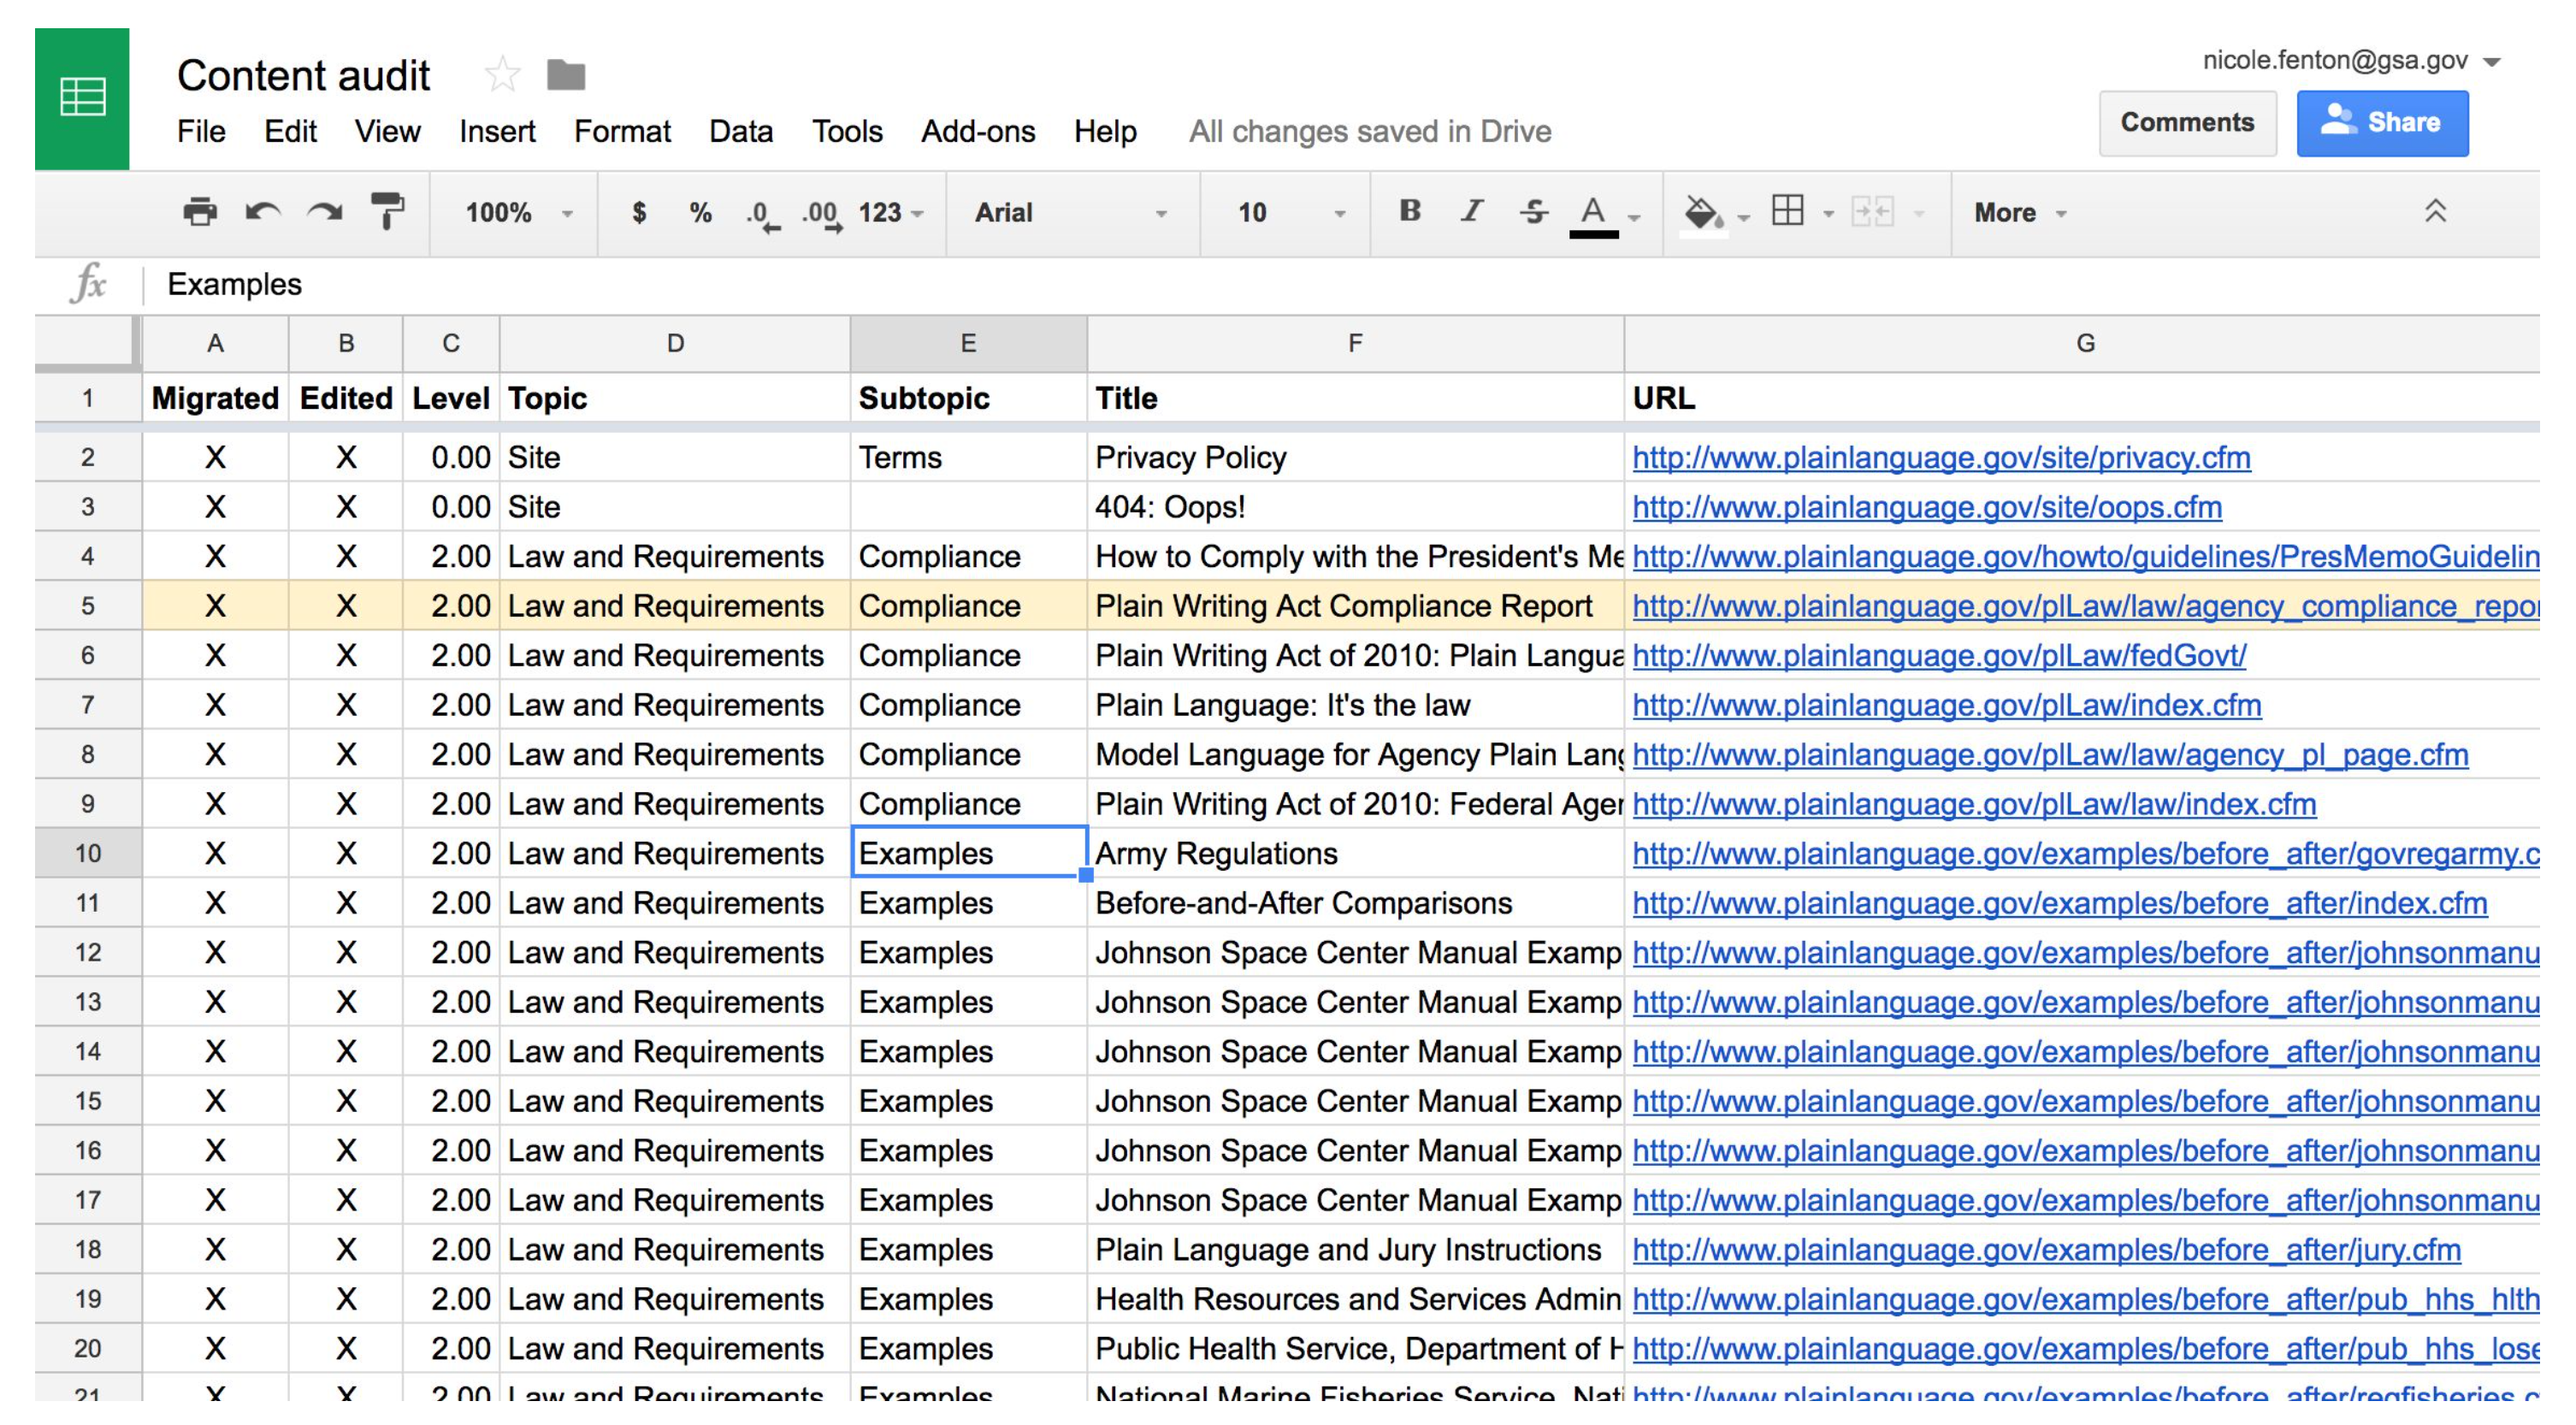 plainlanguage.gov audit spreadsheet showing page titles and URLs organized by topics and subtopics